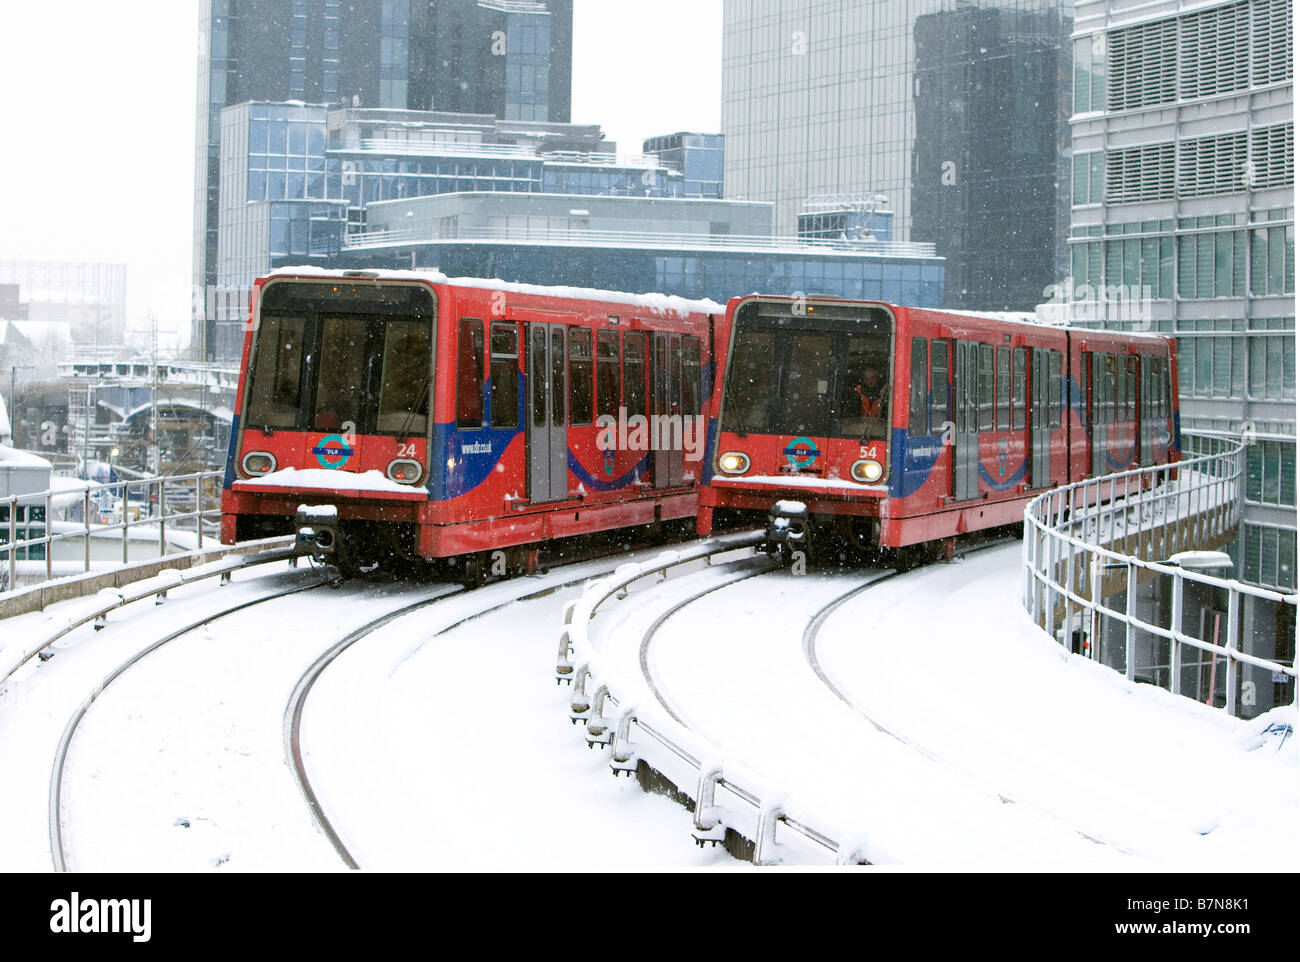 Snow Scenes in the Docklands Area of London February 2009 The DLR Docklands Light Railway near South Quay Station Stock Photo